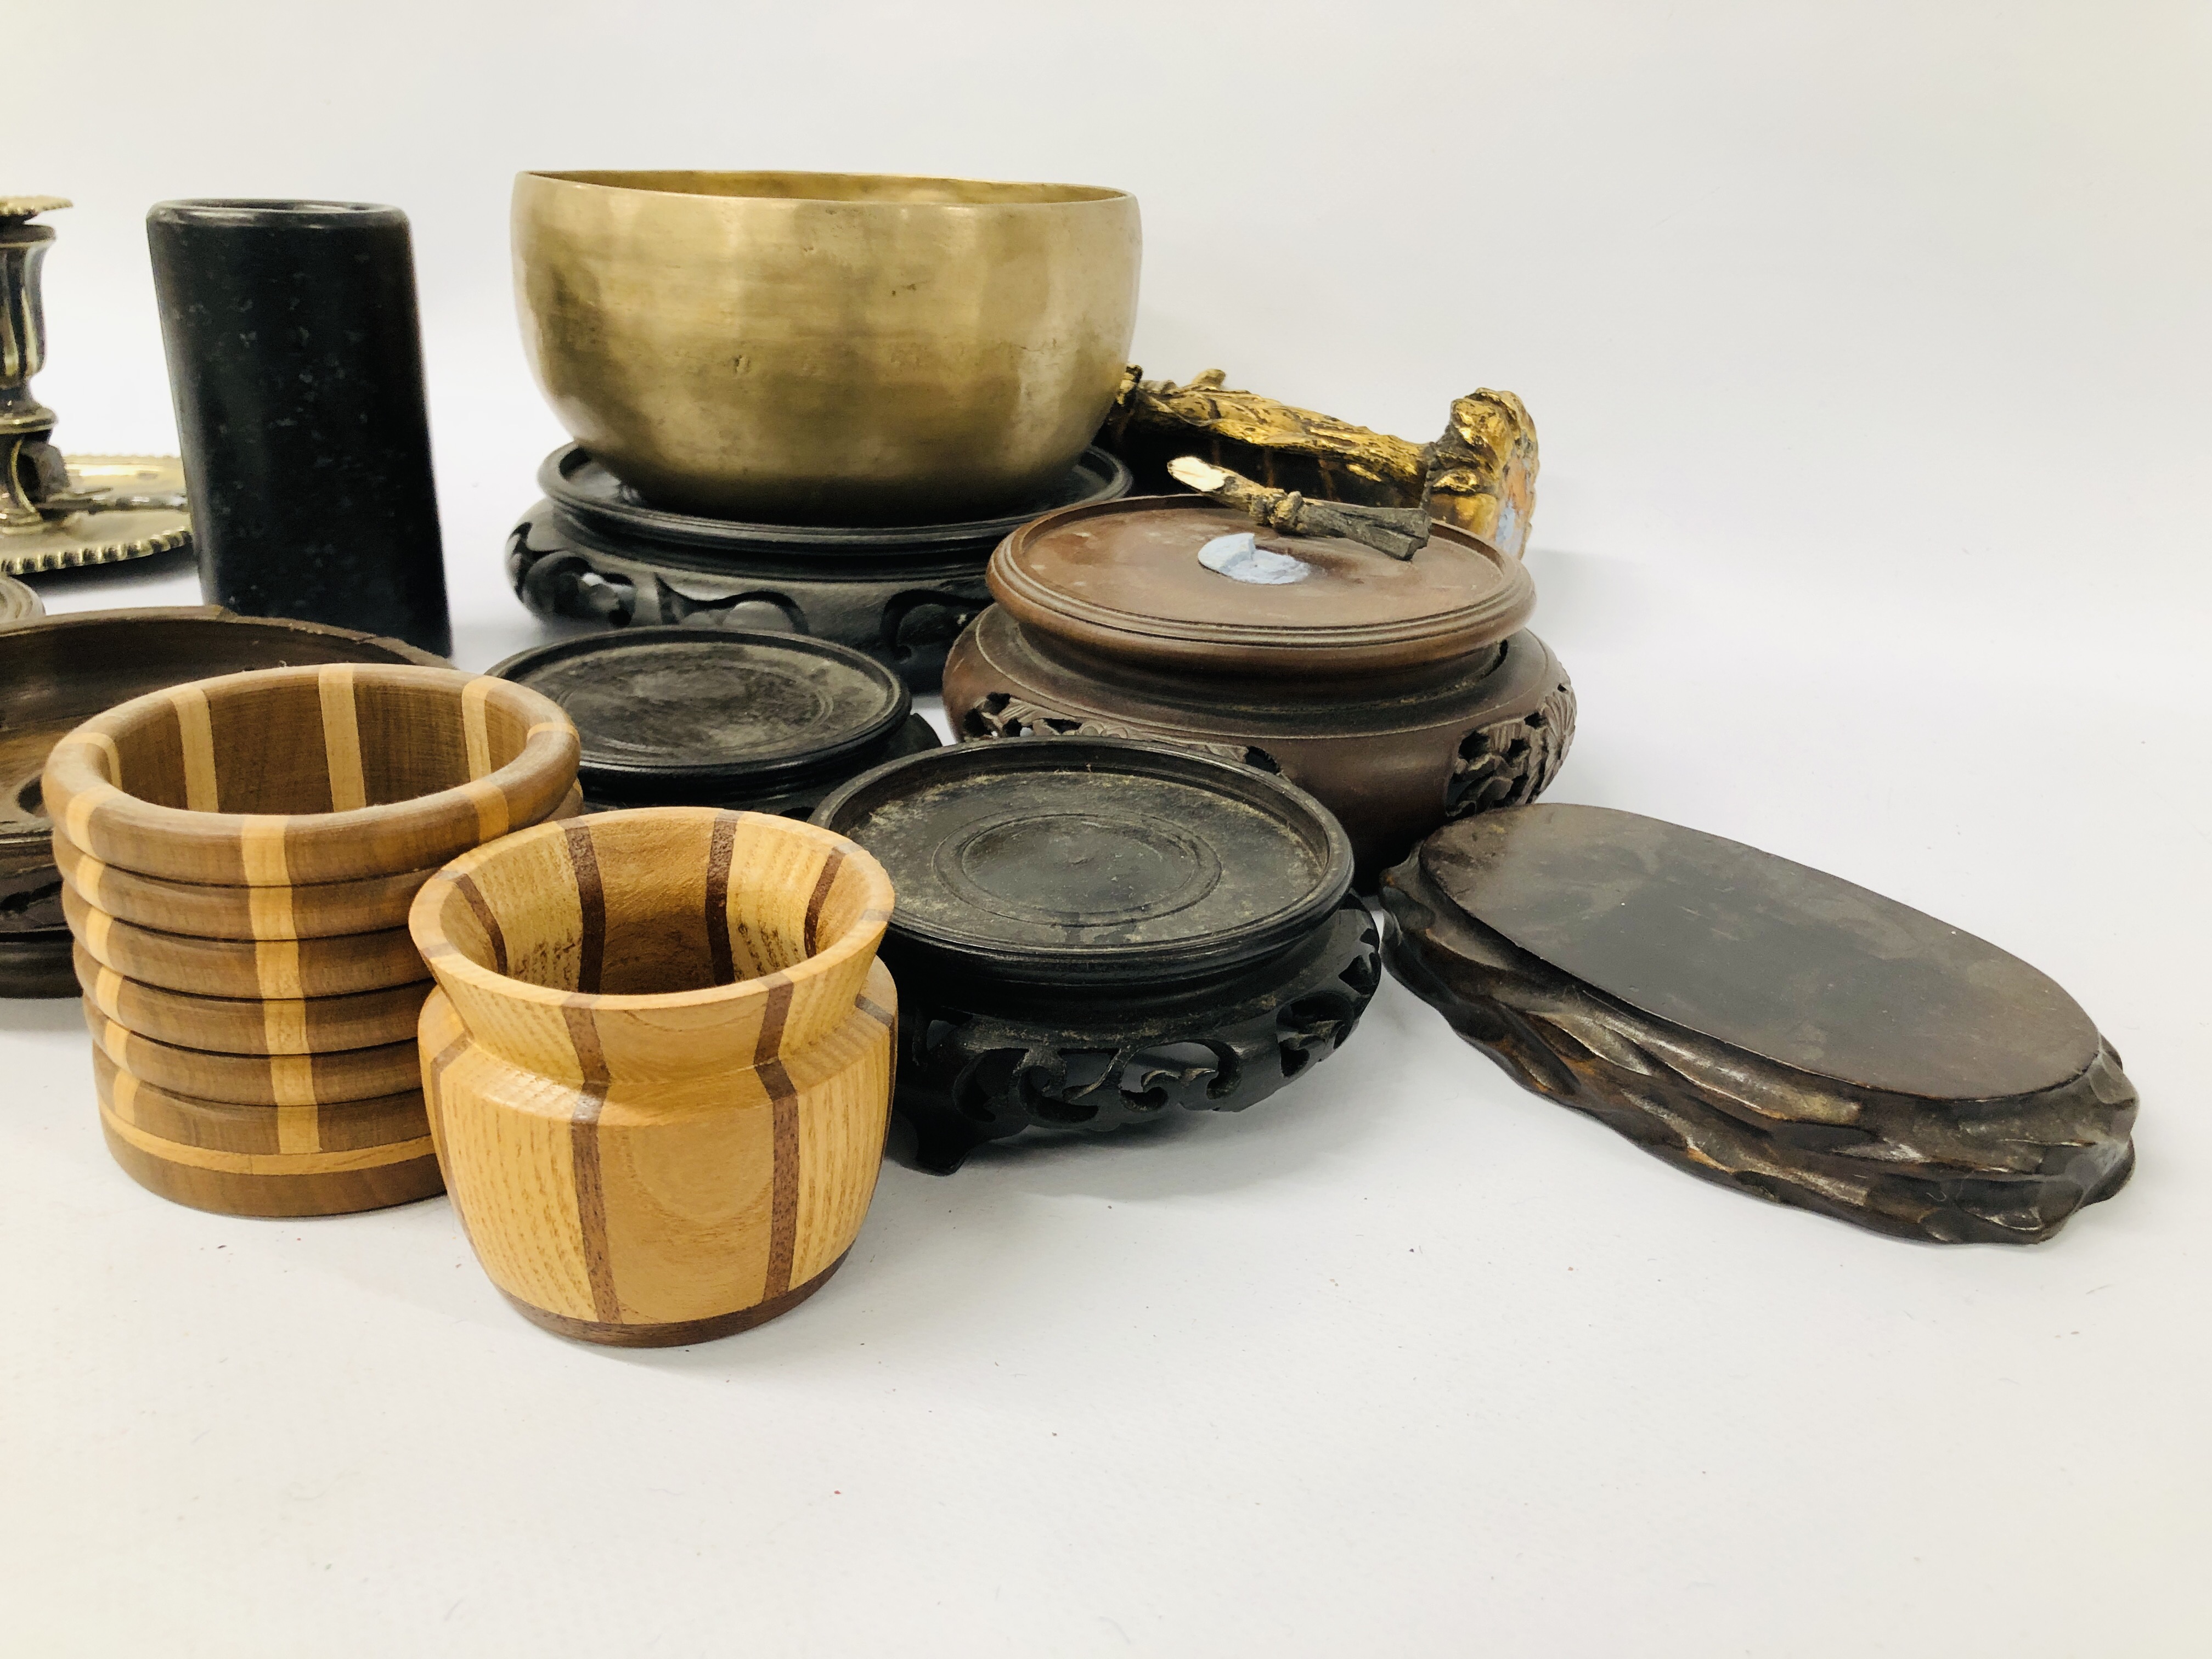 9 X ORIENTAL HARDWOOD STANDS, CHAMBER STICK, INDIAN GILT FINISH CARVING, METAL BOWL ETC. - Image 13 of 13